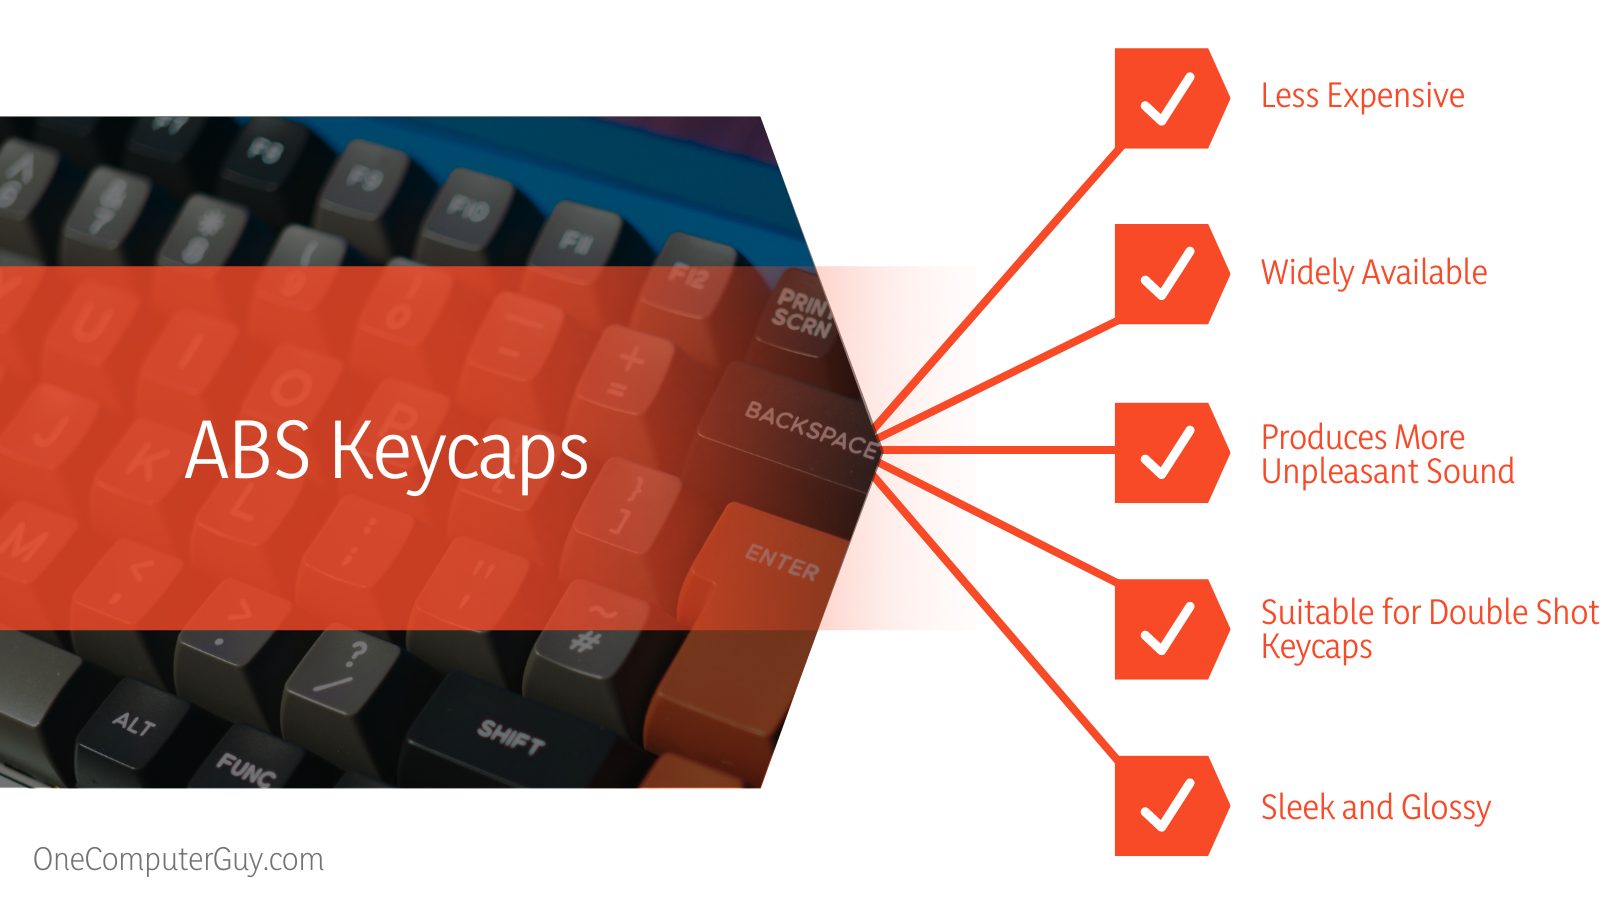 ABS Keycaps Features